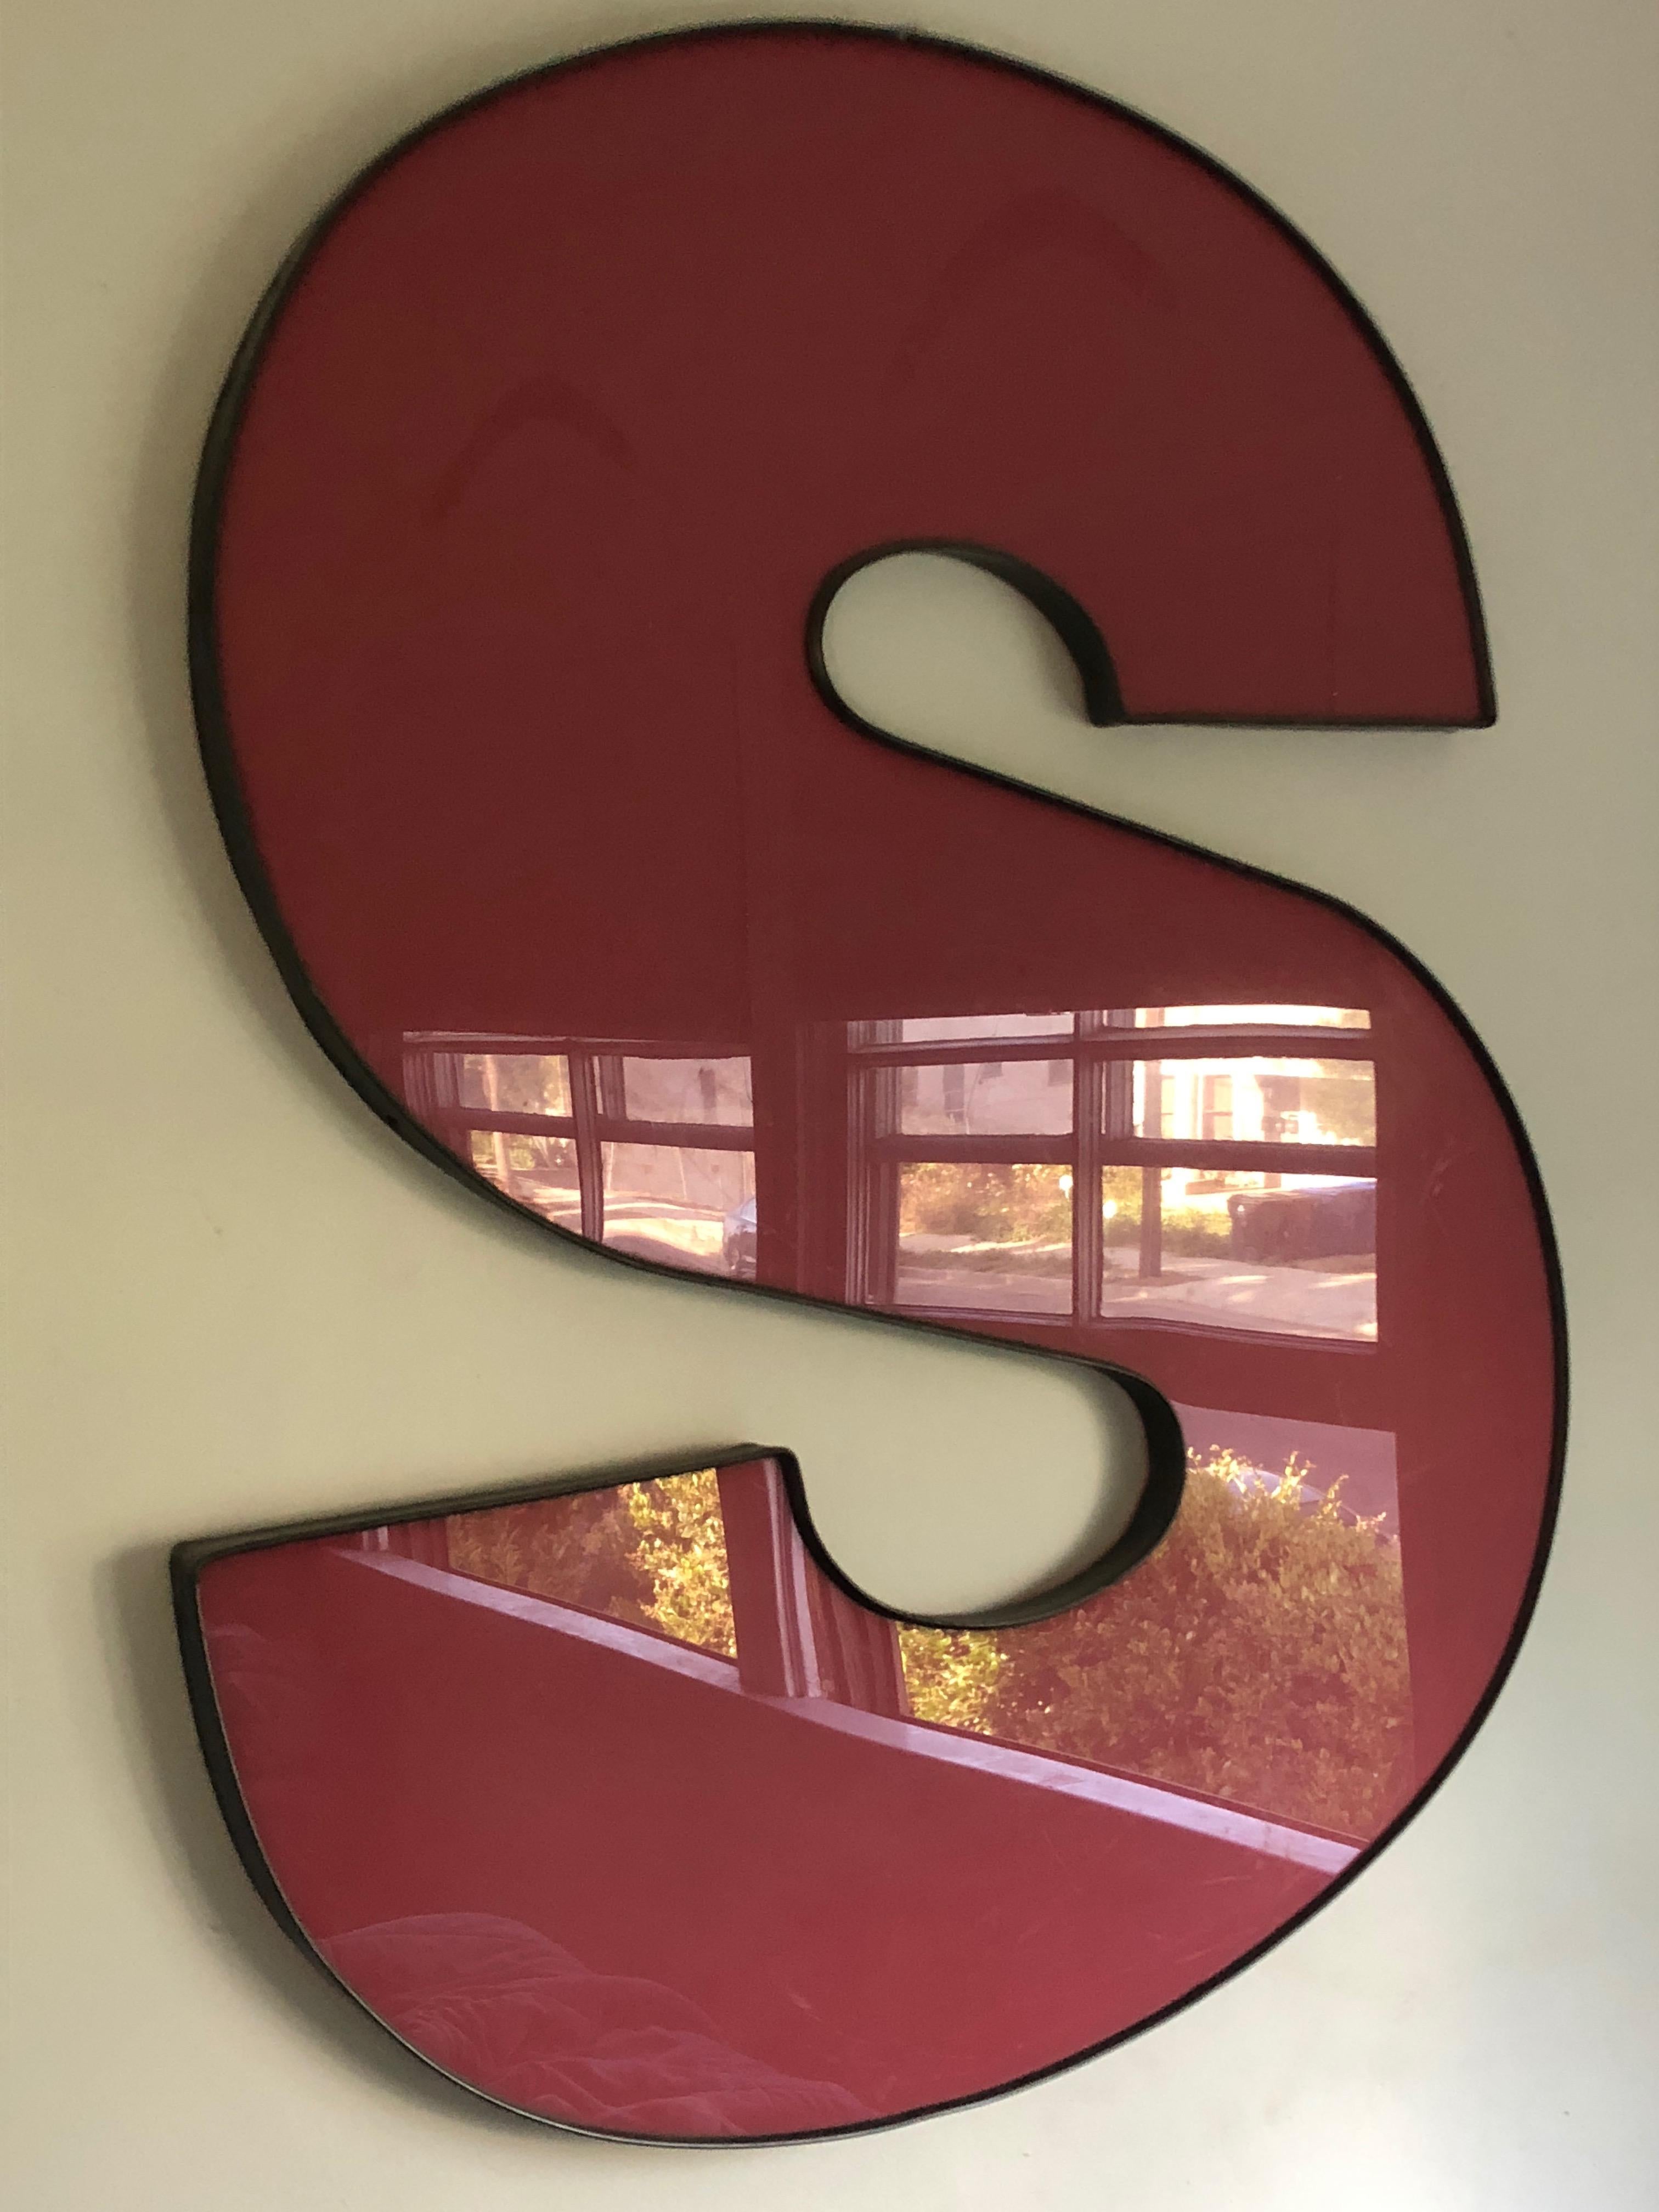 A bold red acrylic letter 